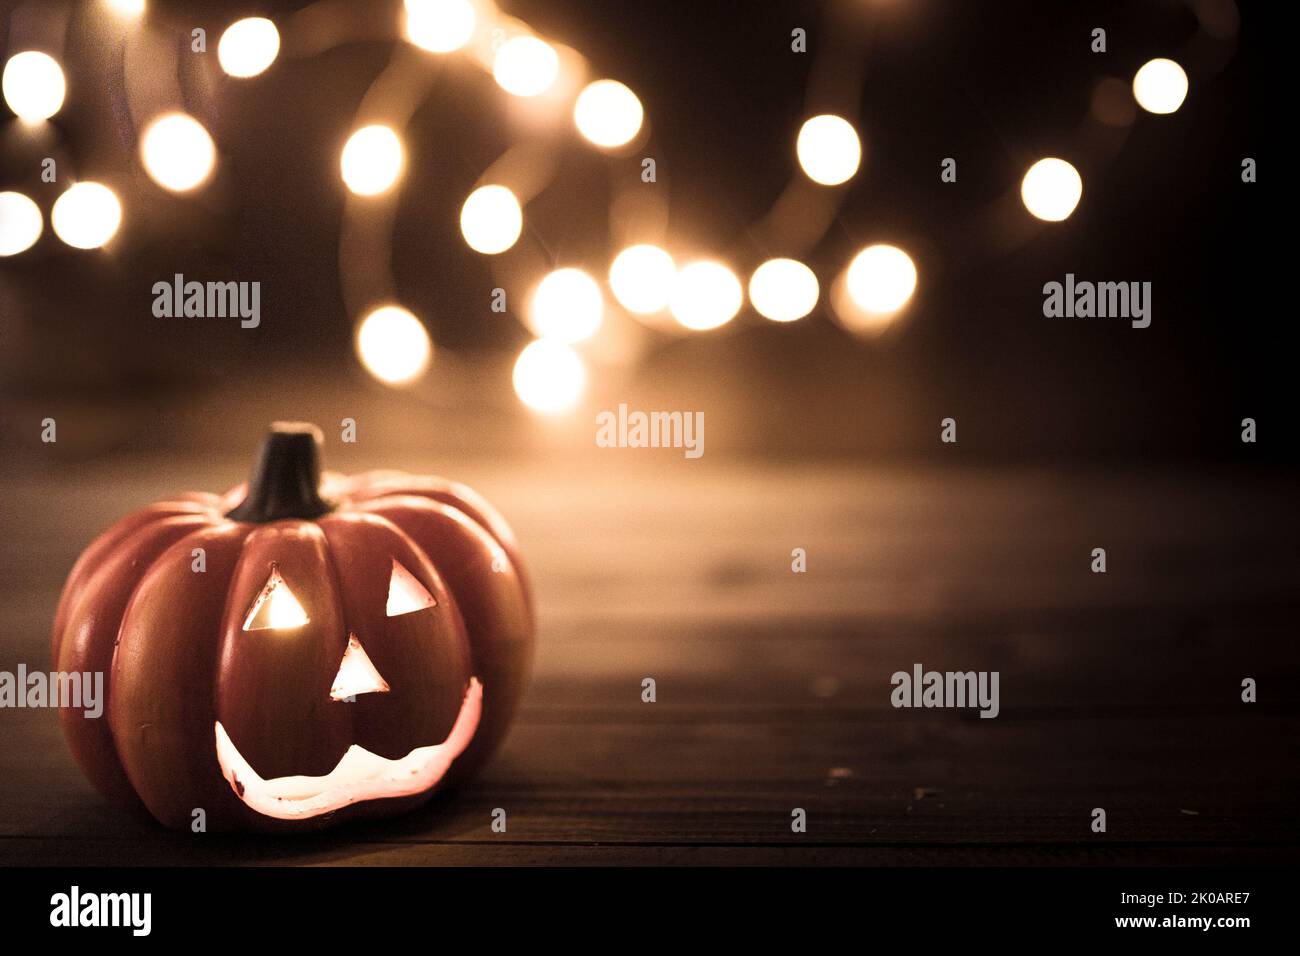 Halloween pumpkin wallpaper with string lights bokeh in the background. Toned vintage colors, copy space. Stock Photo